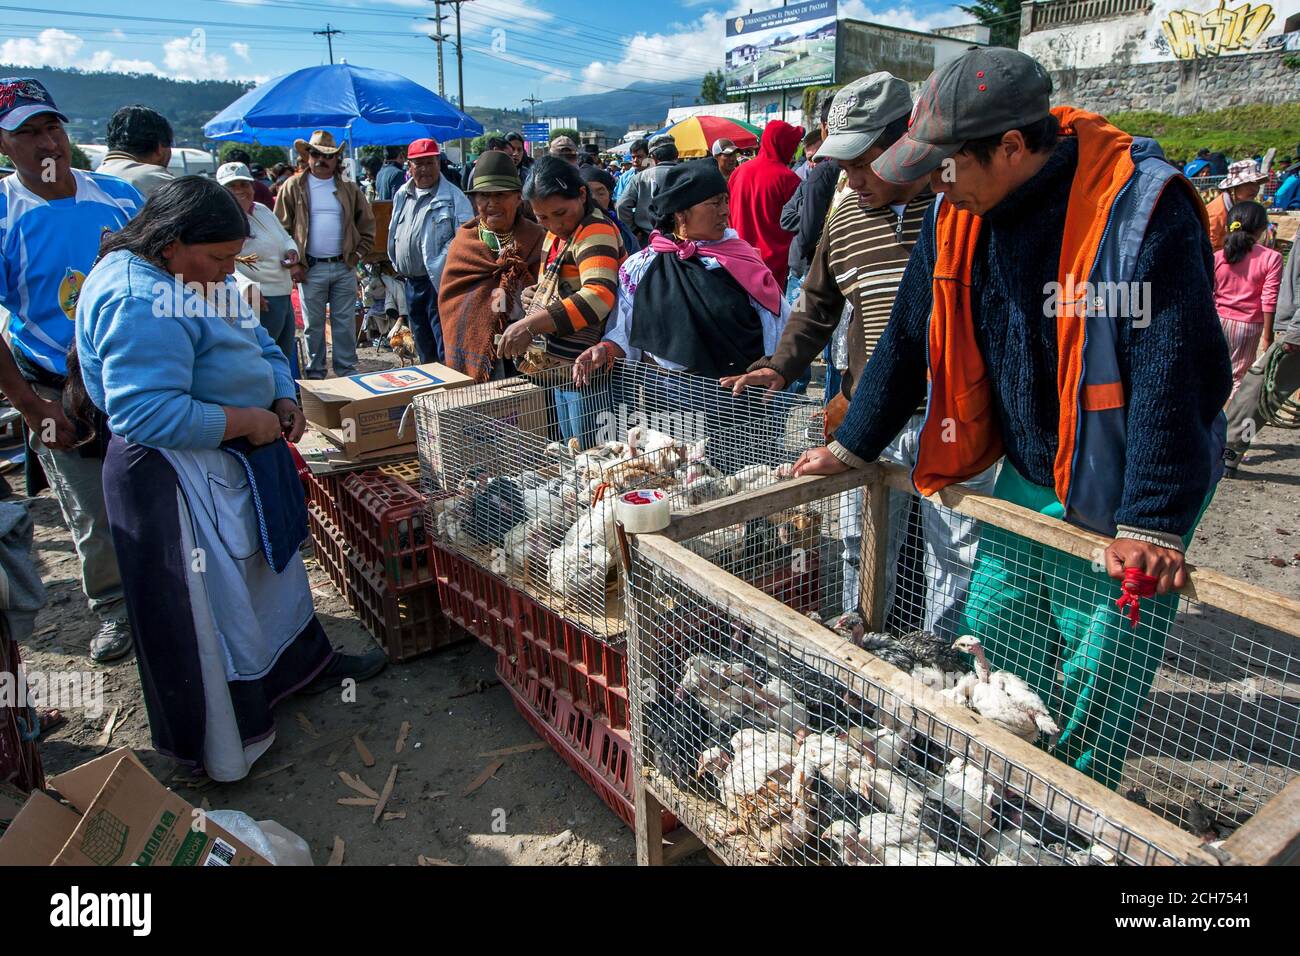 Potential buyers inspect a cage of turkeys and chickens at the Otavalo animal market at Otavalo in Ecuador. The market sells a variety of livestock. Stock Photo